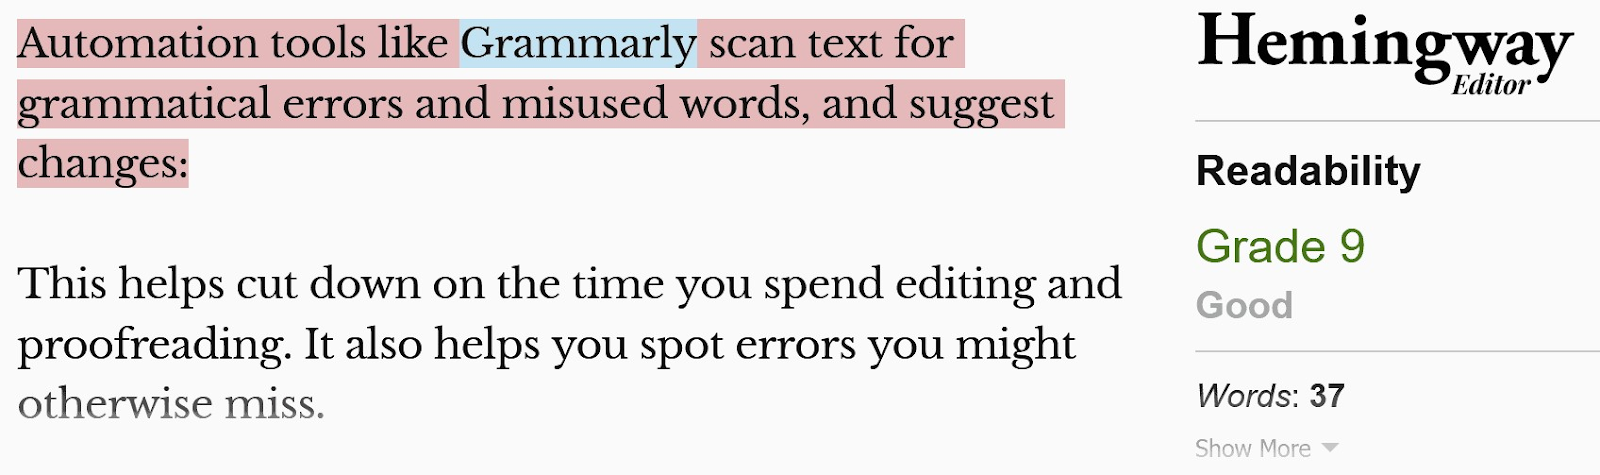 Hemingway editor shows how to fix hard-to-read sentences